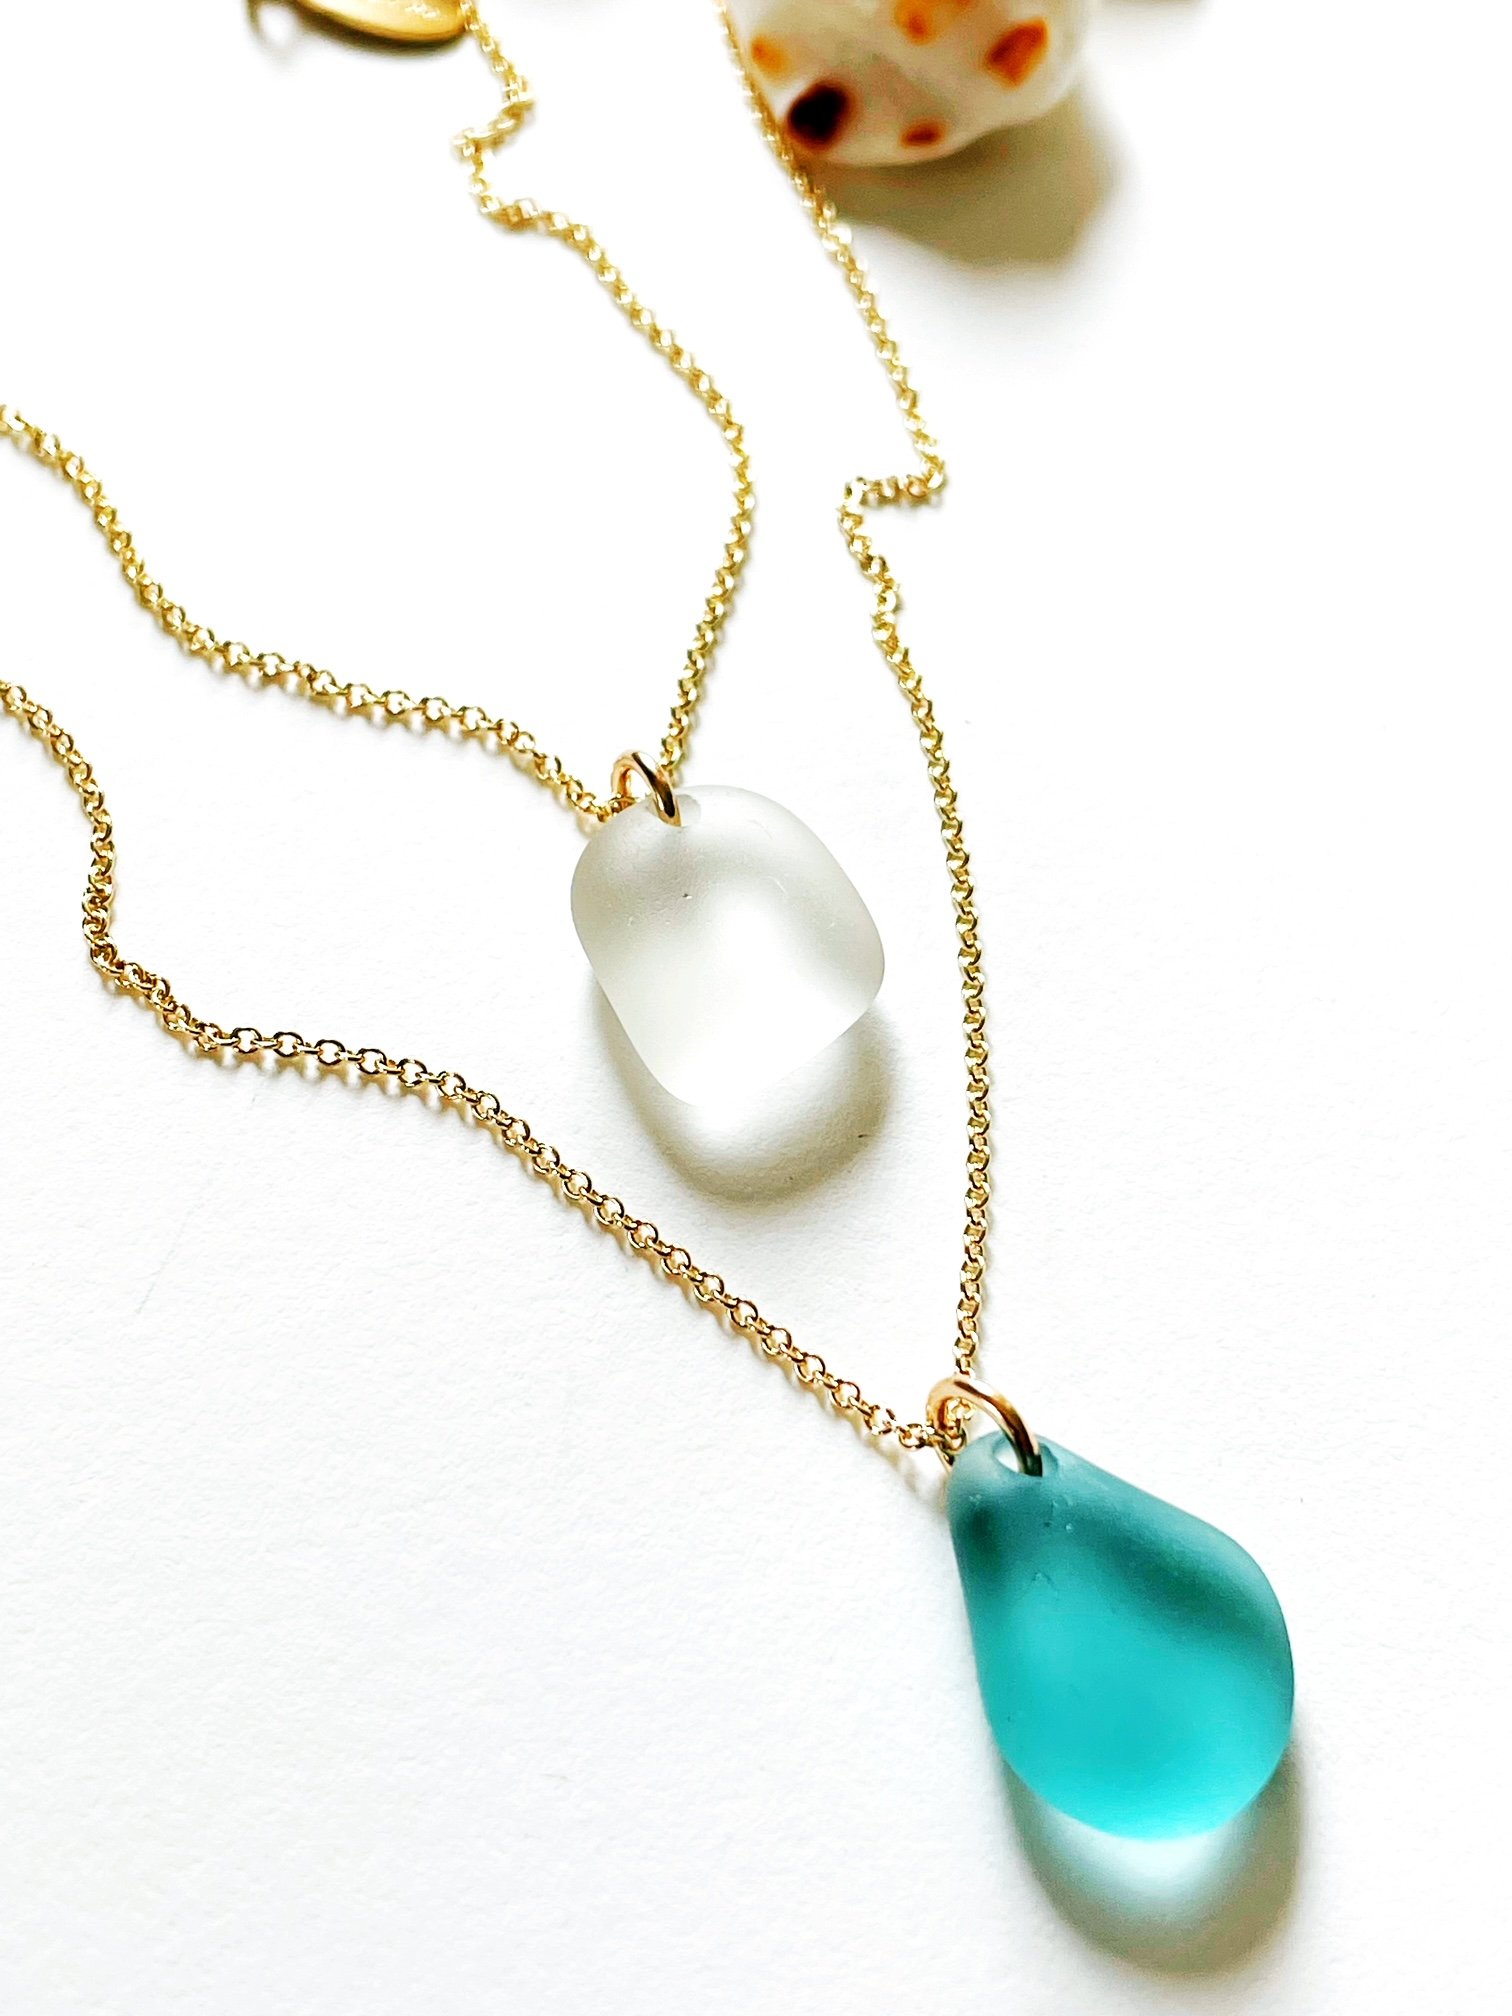 SEA DROP NECKLACE — SEA AND GLASS